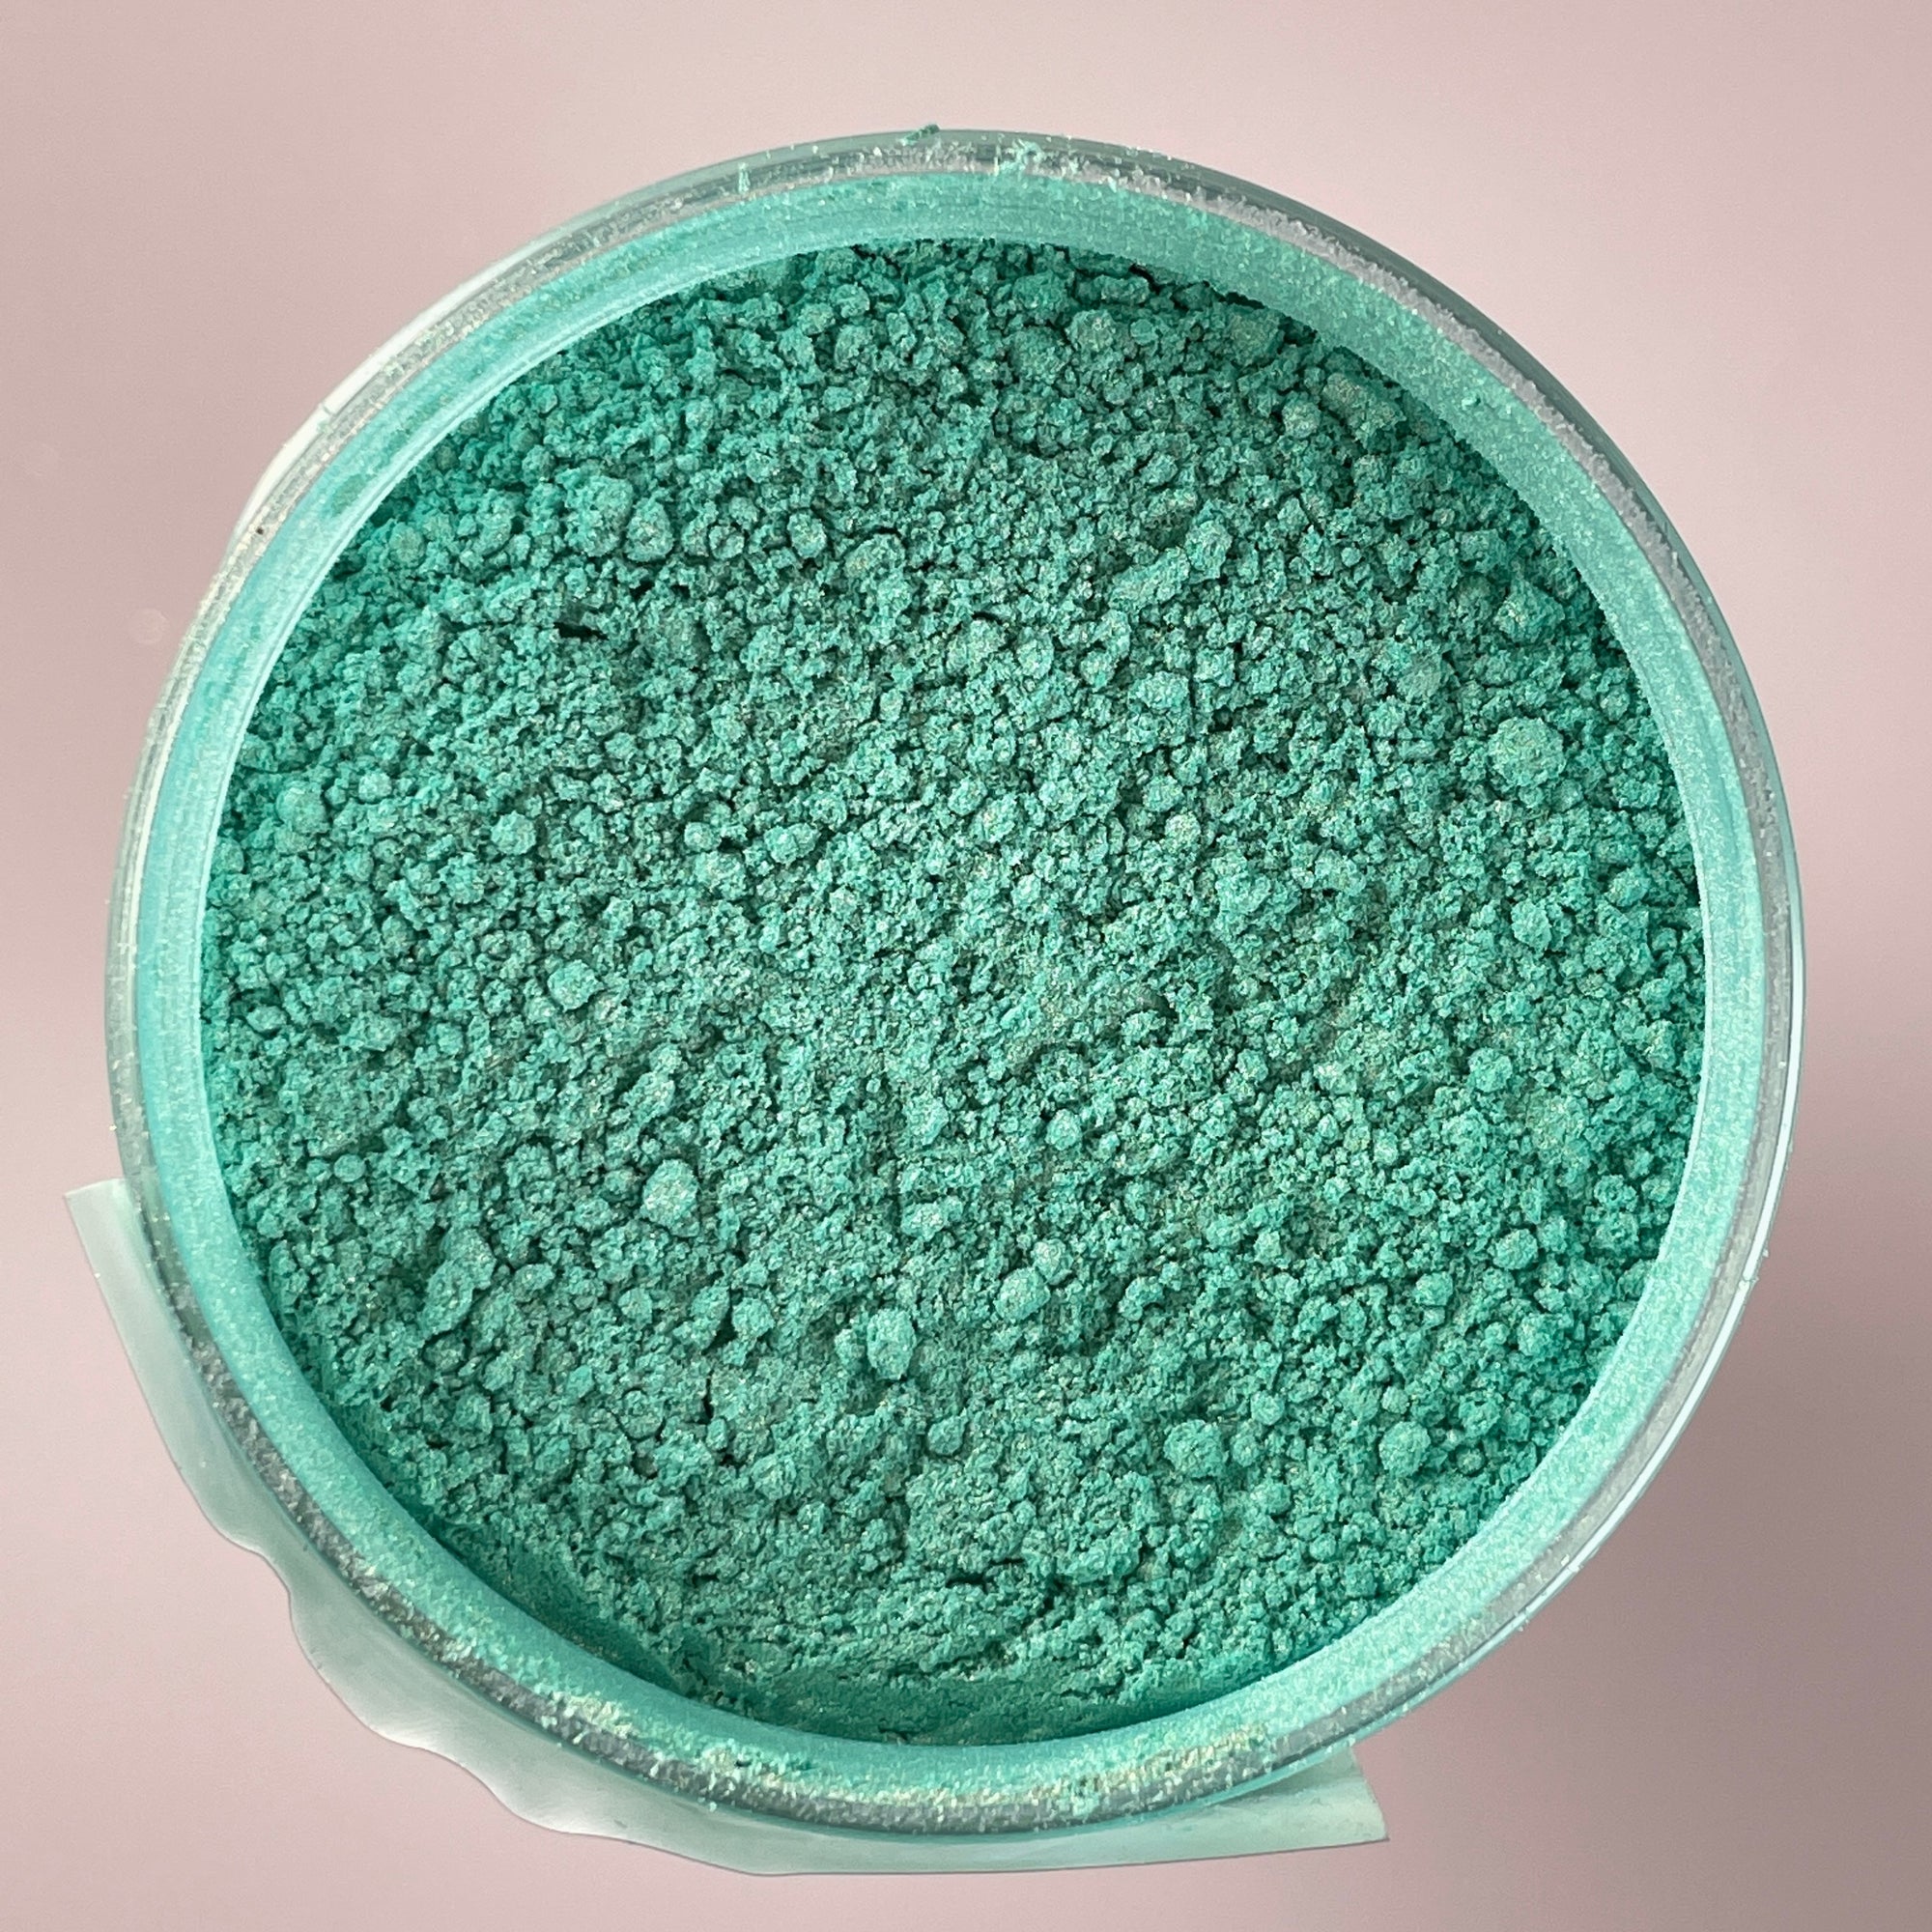 Iridescent mica powder for creating unique color effects to give a green tone